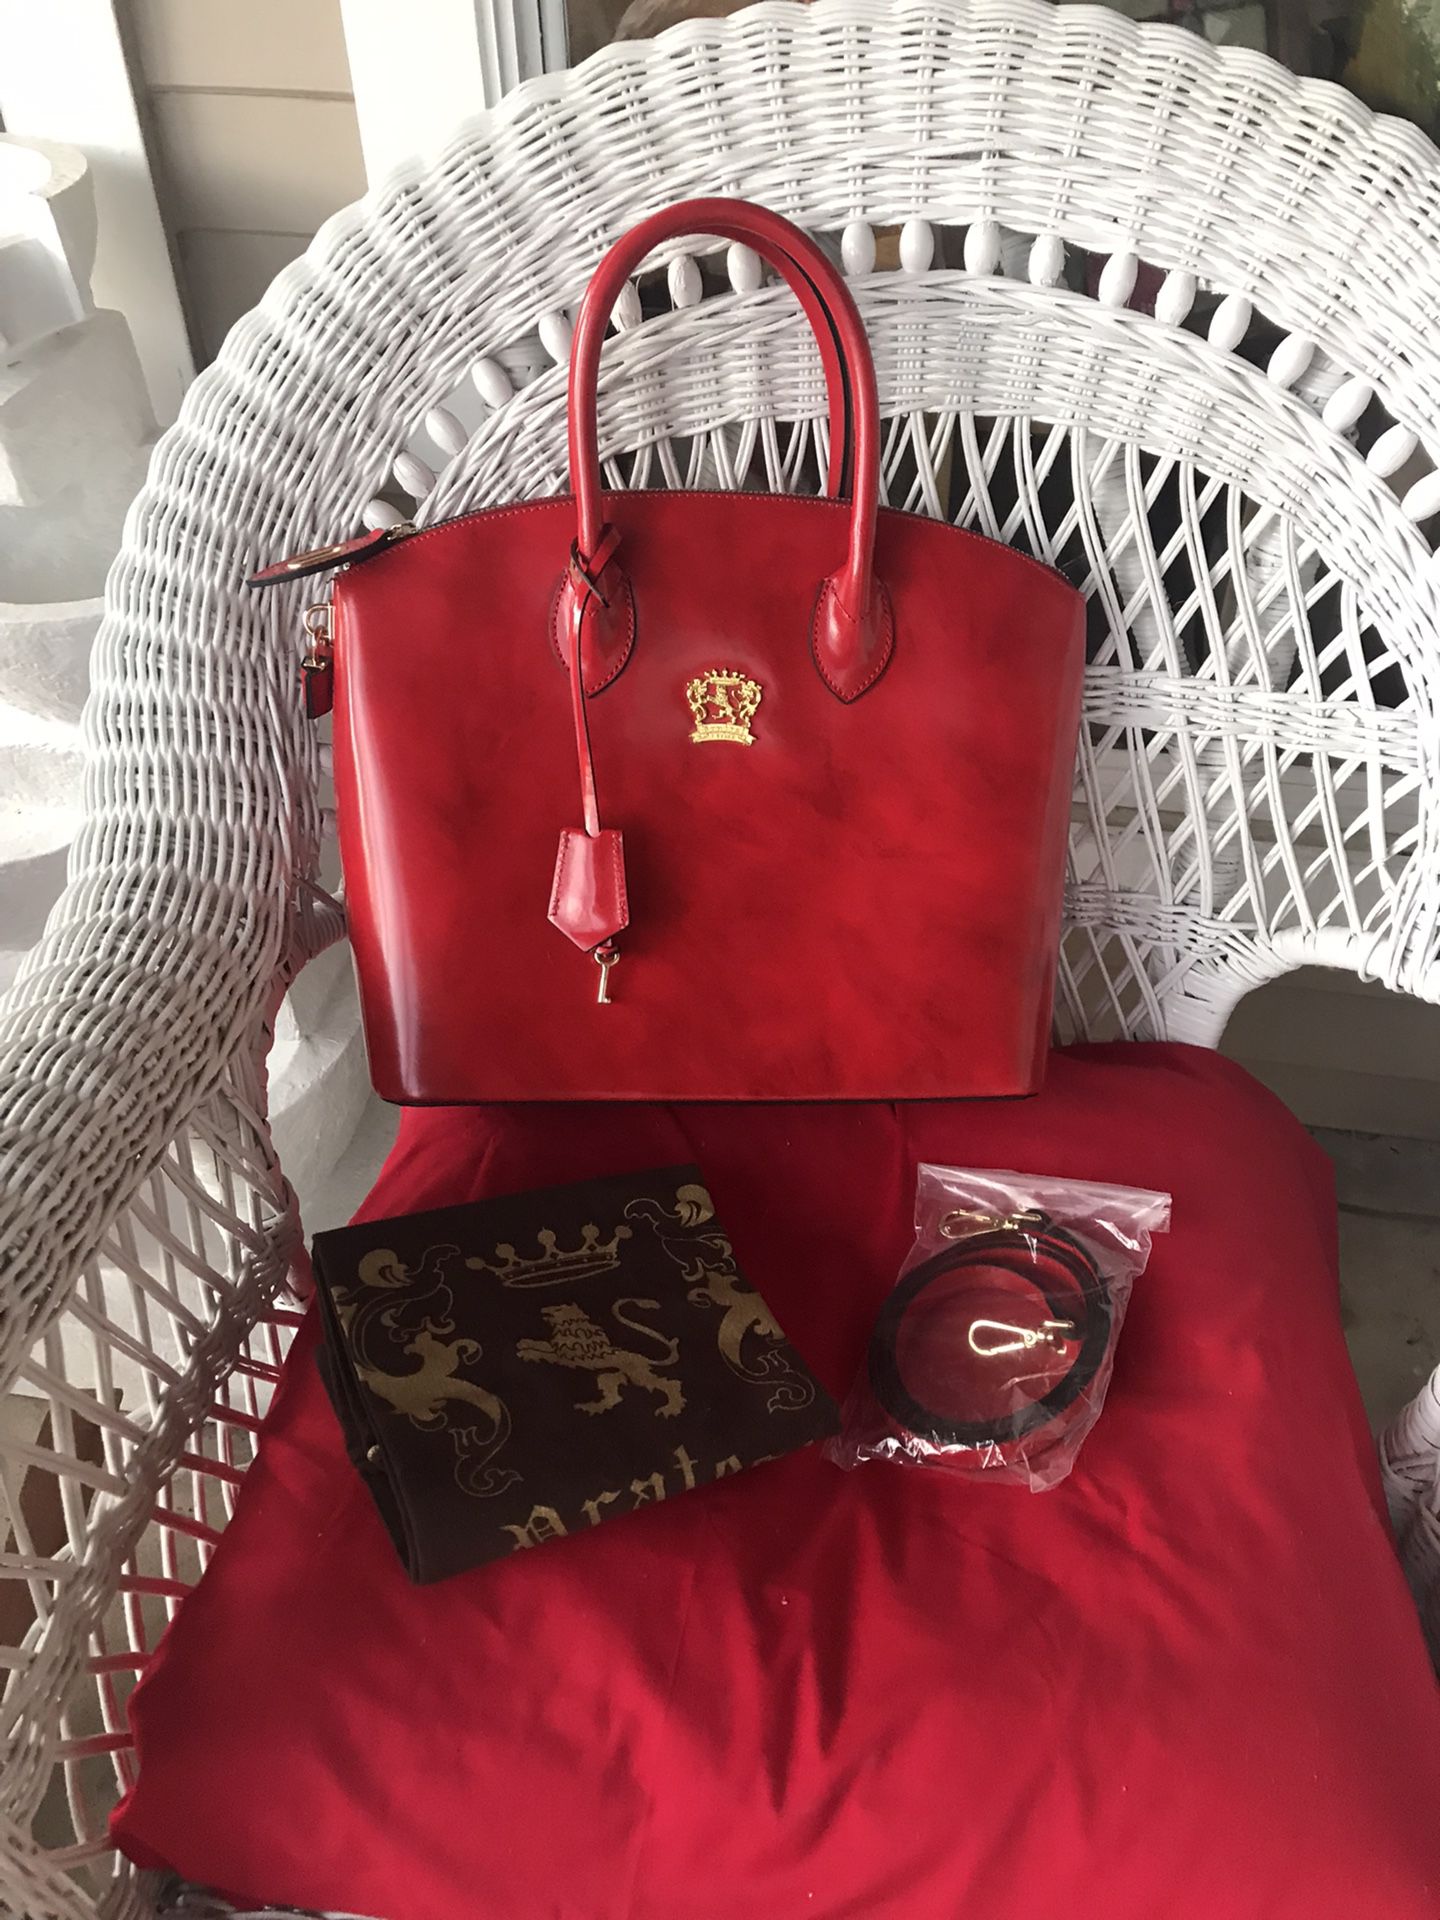 Absolutely Gorgeous New Pratesi Firenze Bag In Red. for Sale in Arlington,  TX - OfferUp